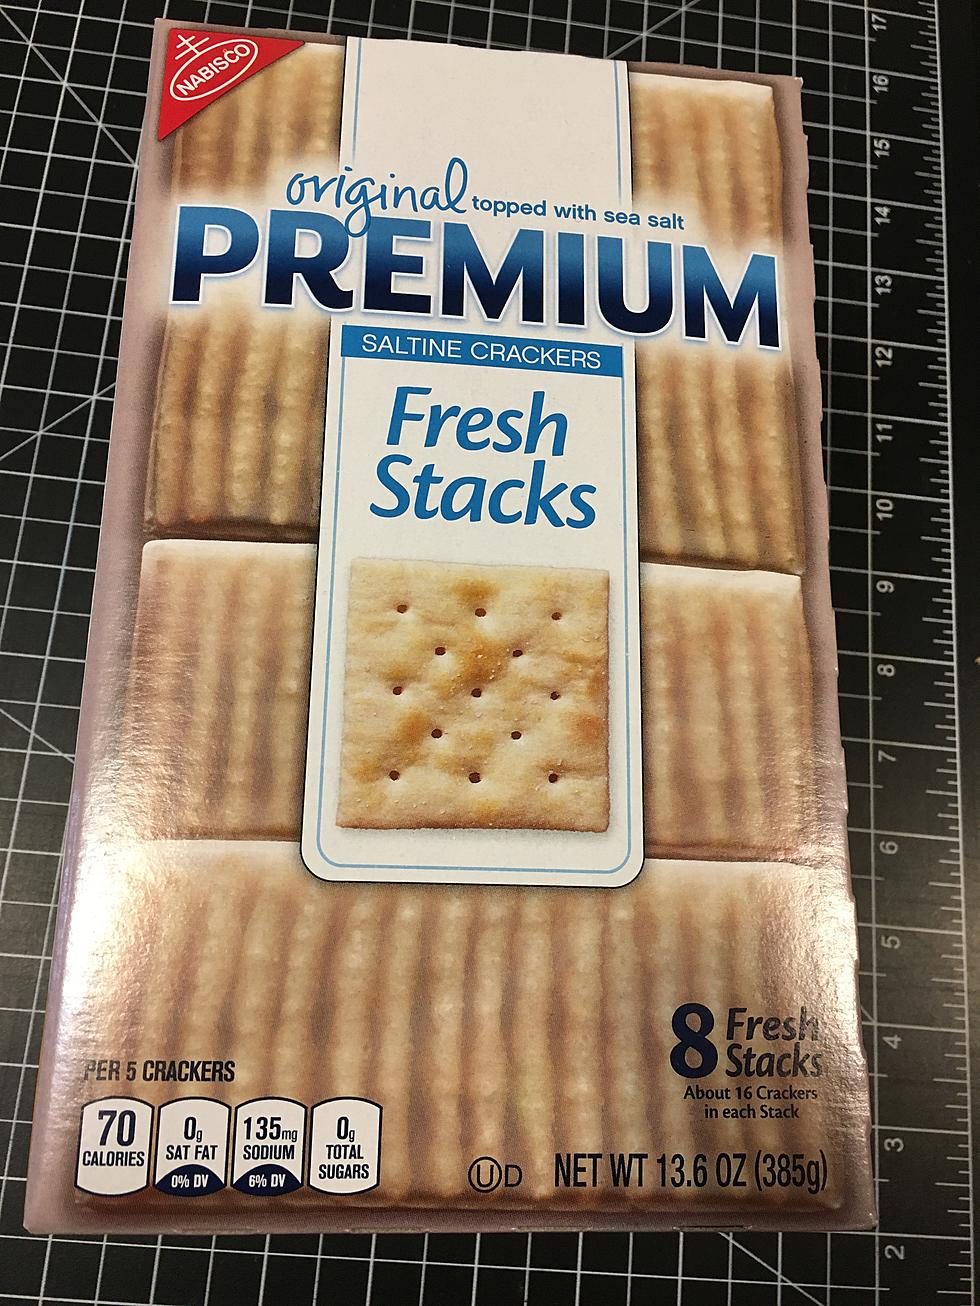 Lubbock Man Offers to Sell Last Box of Crackers in Town for $350